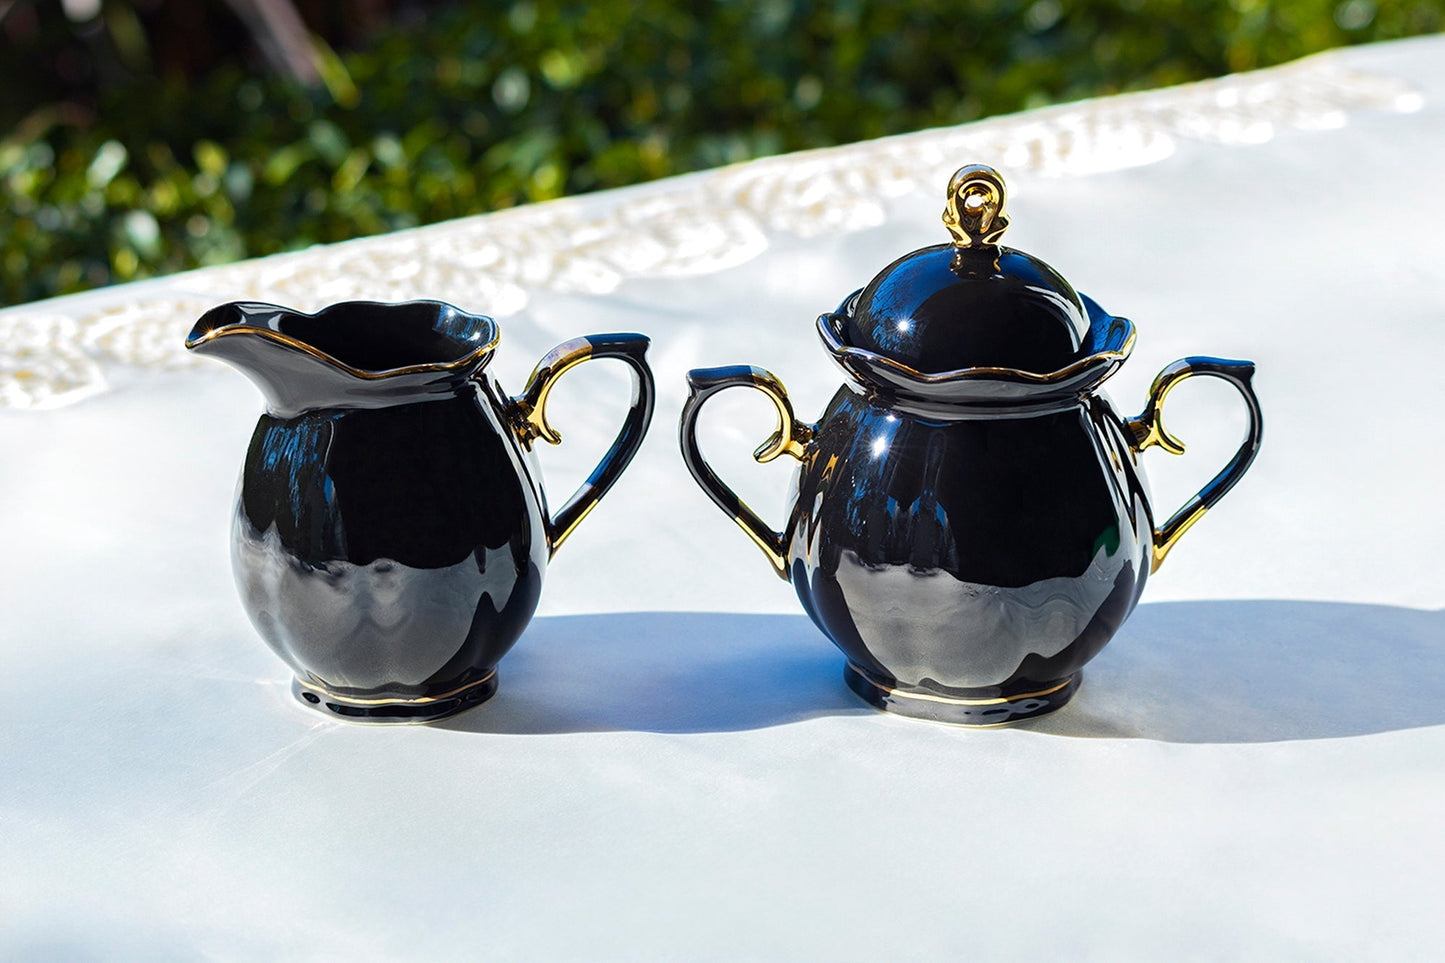 Black Gold Teapot + Sugar Creamer + 4 Assorted Black Gold Luster Tea Cup and Saucer Sets - Spider, Skull, Crow, Witchy Crystal Ball